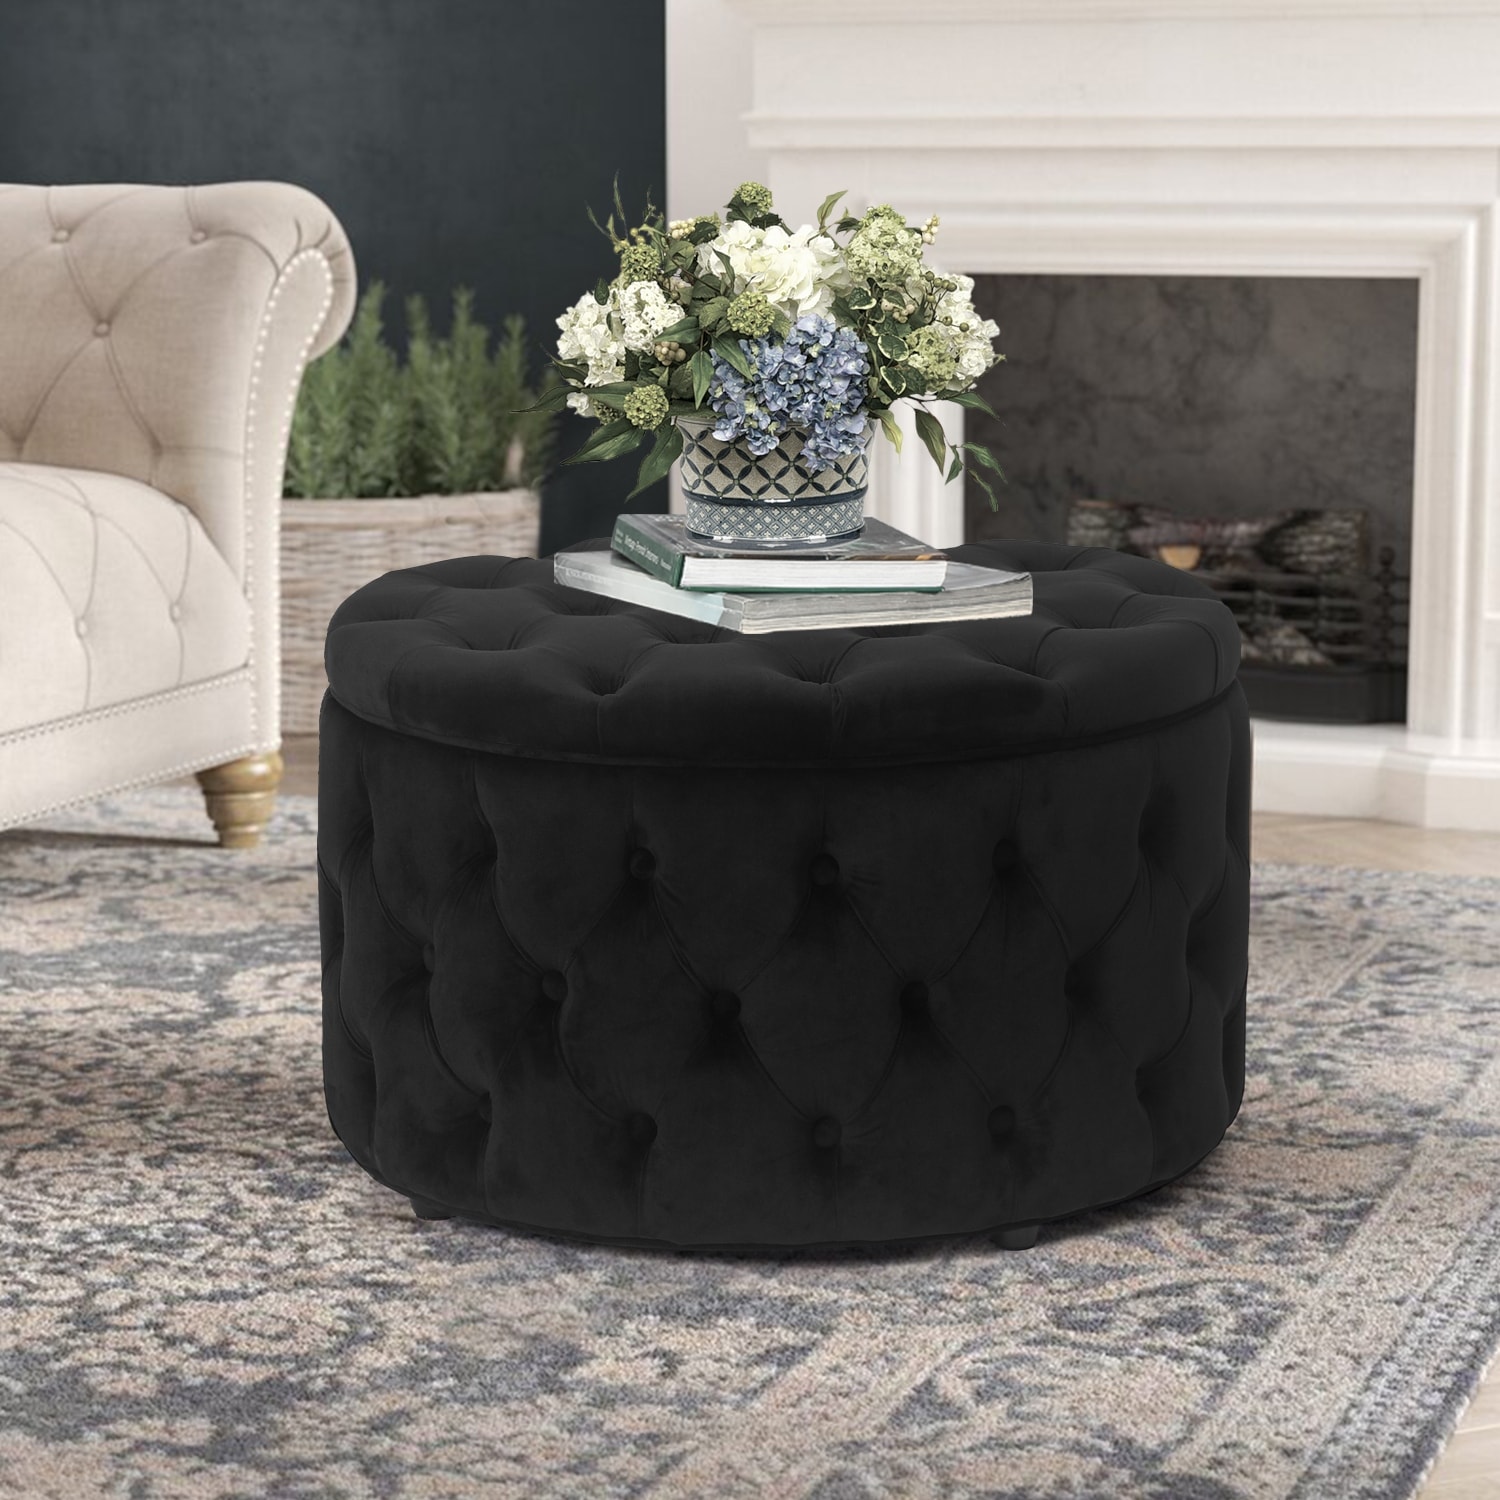 https://ak1.ostkcdn.com/images/products/is/images/direct/3200ea1ba7b9829ef5d6f4fbc1ba3fe4d4e8f261/Adeco-Round-Storage-Ottoman-Button-Tufted-Footrest-Stool-Bench.jpg